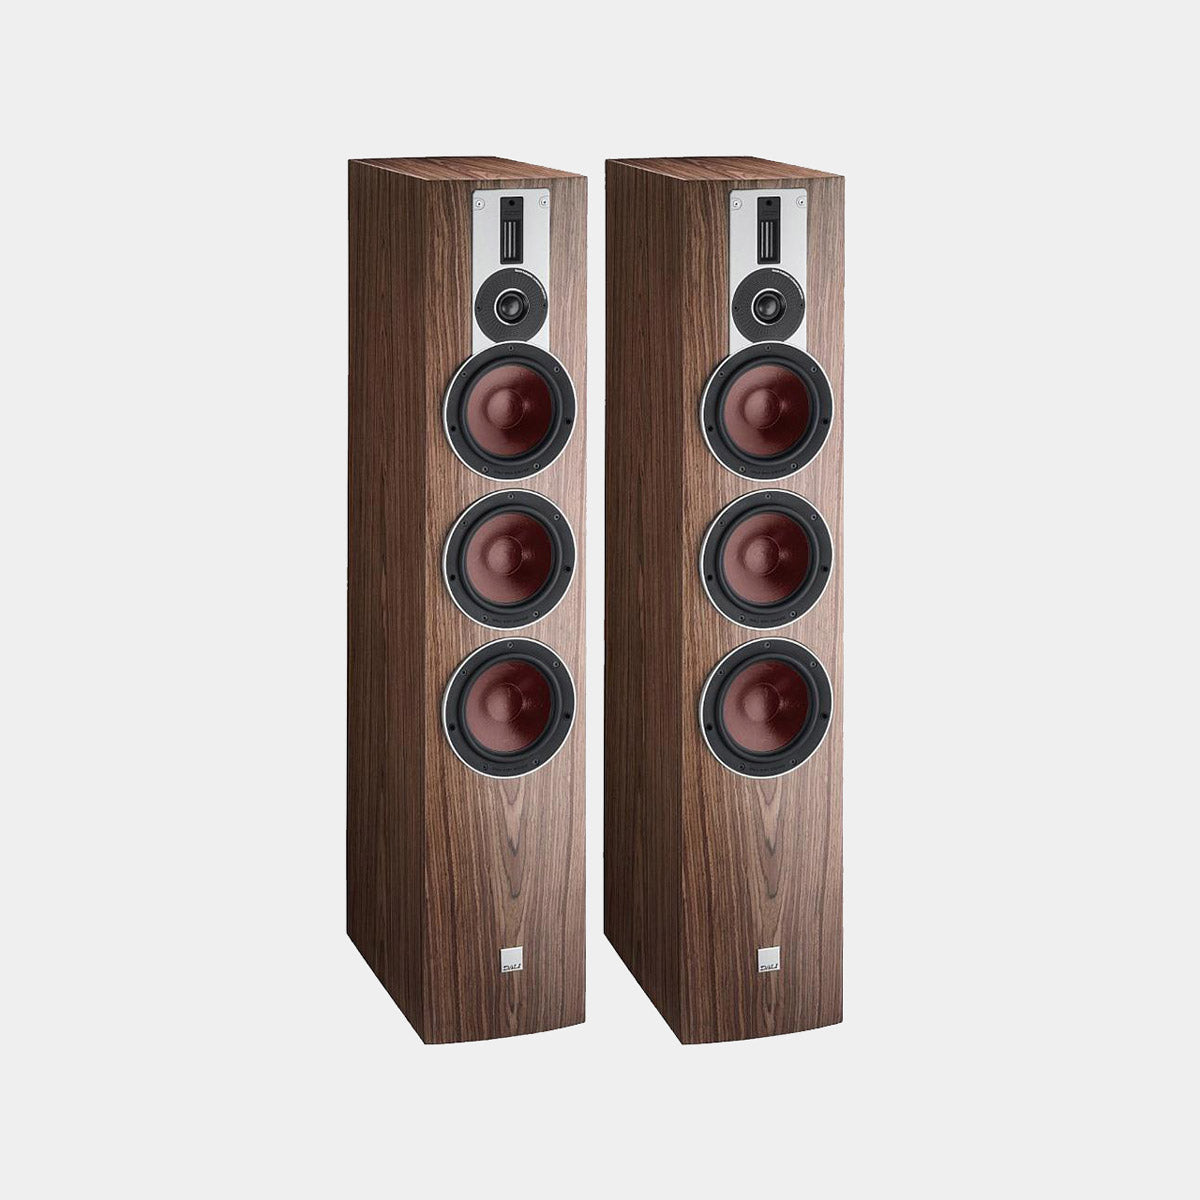 Oak finished Rubicon 8 spaekers by Dali pack powerful but accurate sound